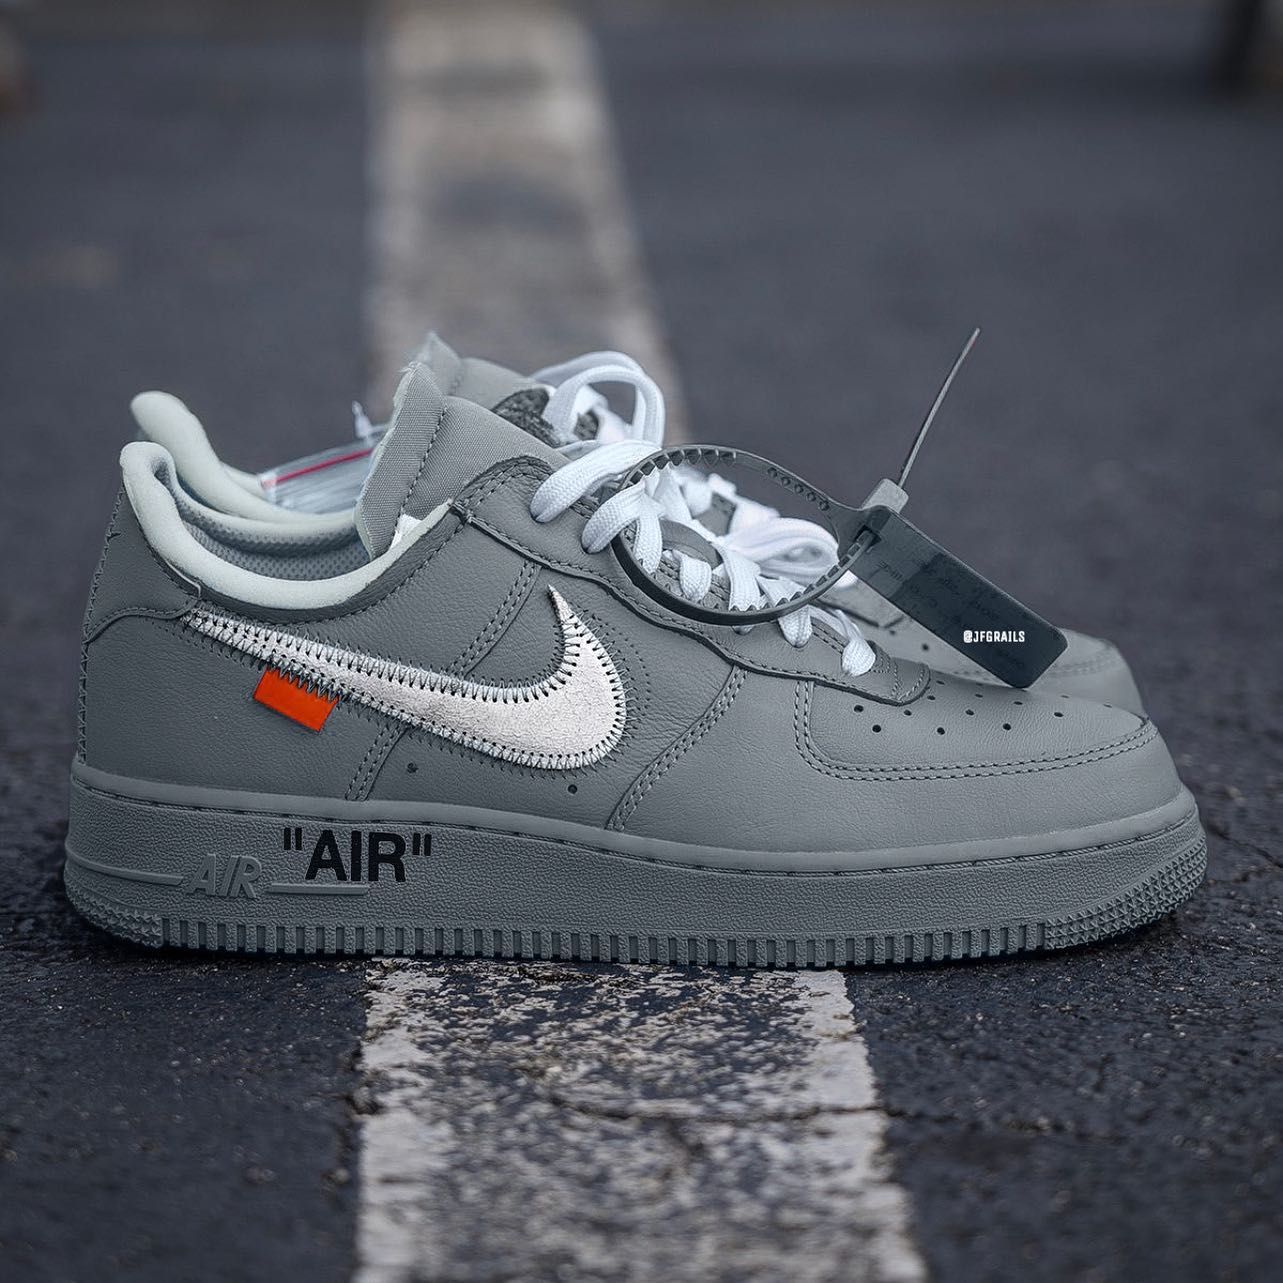 OFF-WHITE x Nike Air Force 1 Low “Ghost Grey” Releasing Soon 